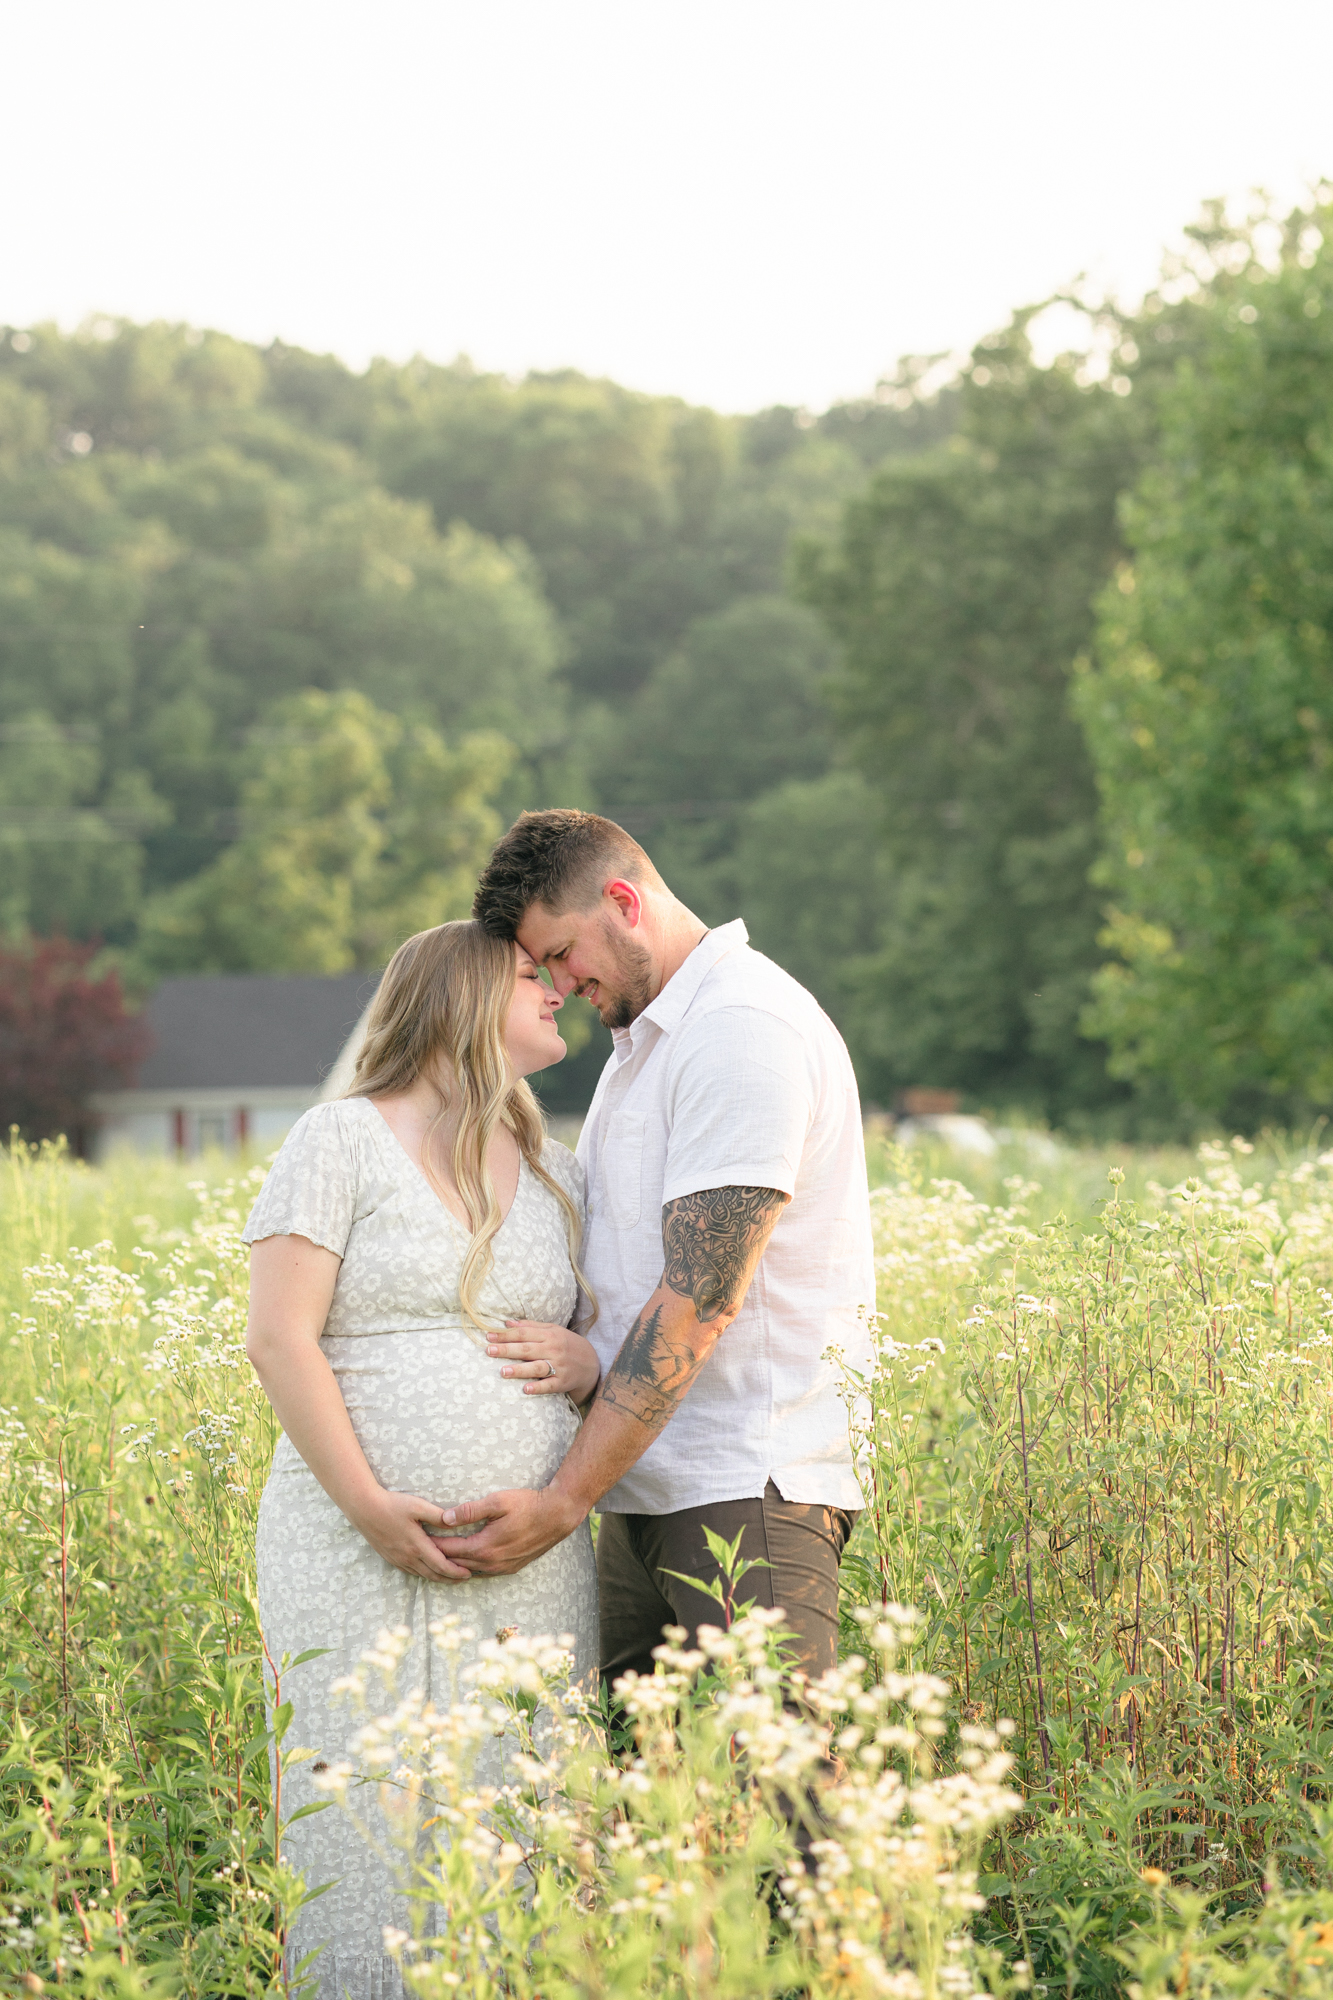 Portrait of a new mom and dad embracing in a field of wildflowers taken by one of the best Louisville maternity photographers Missy Marshall